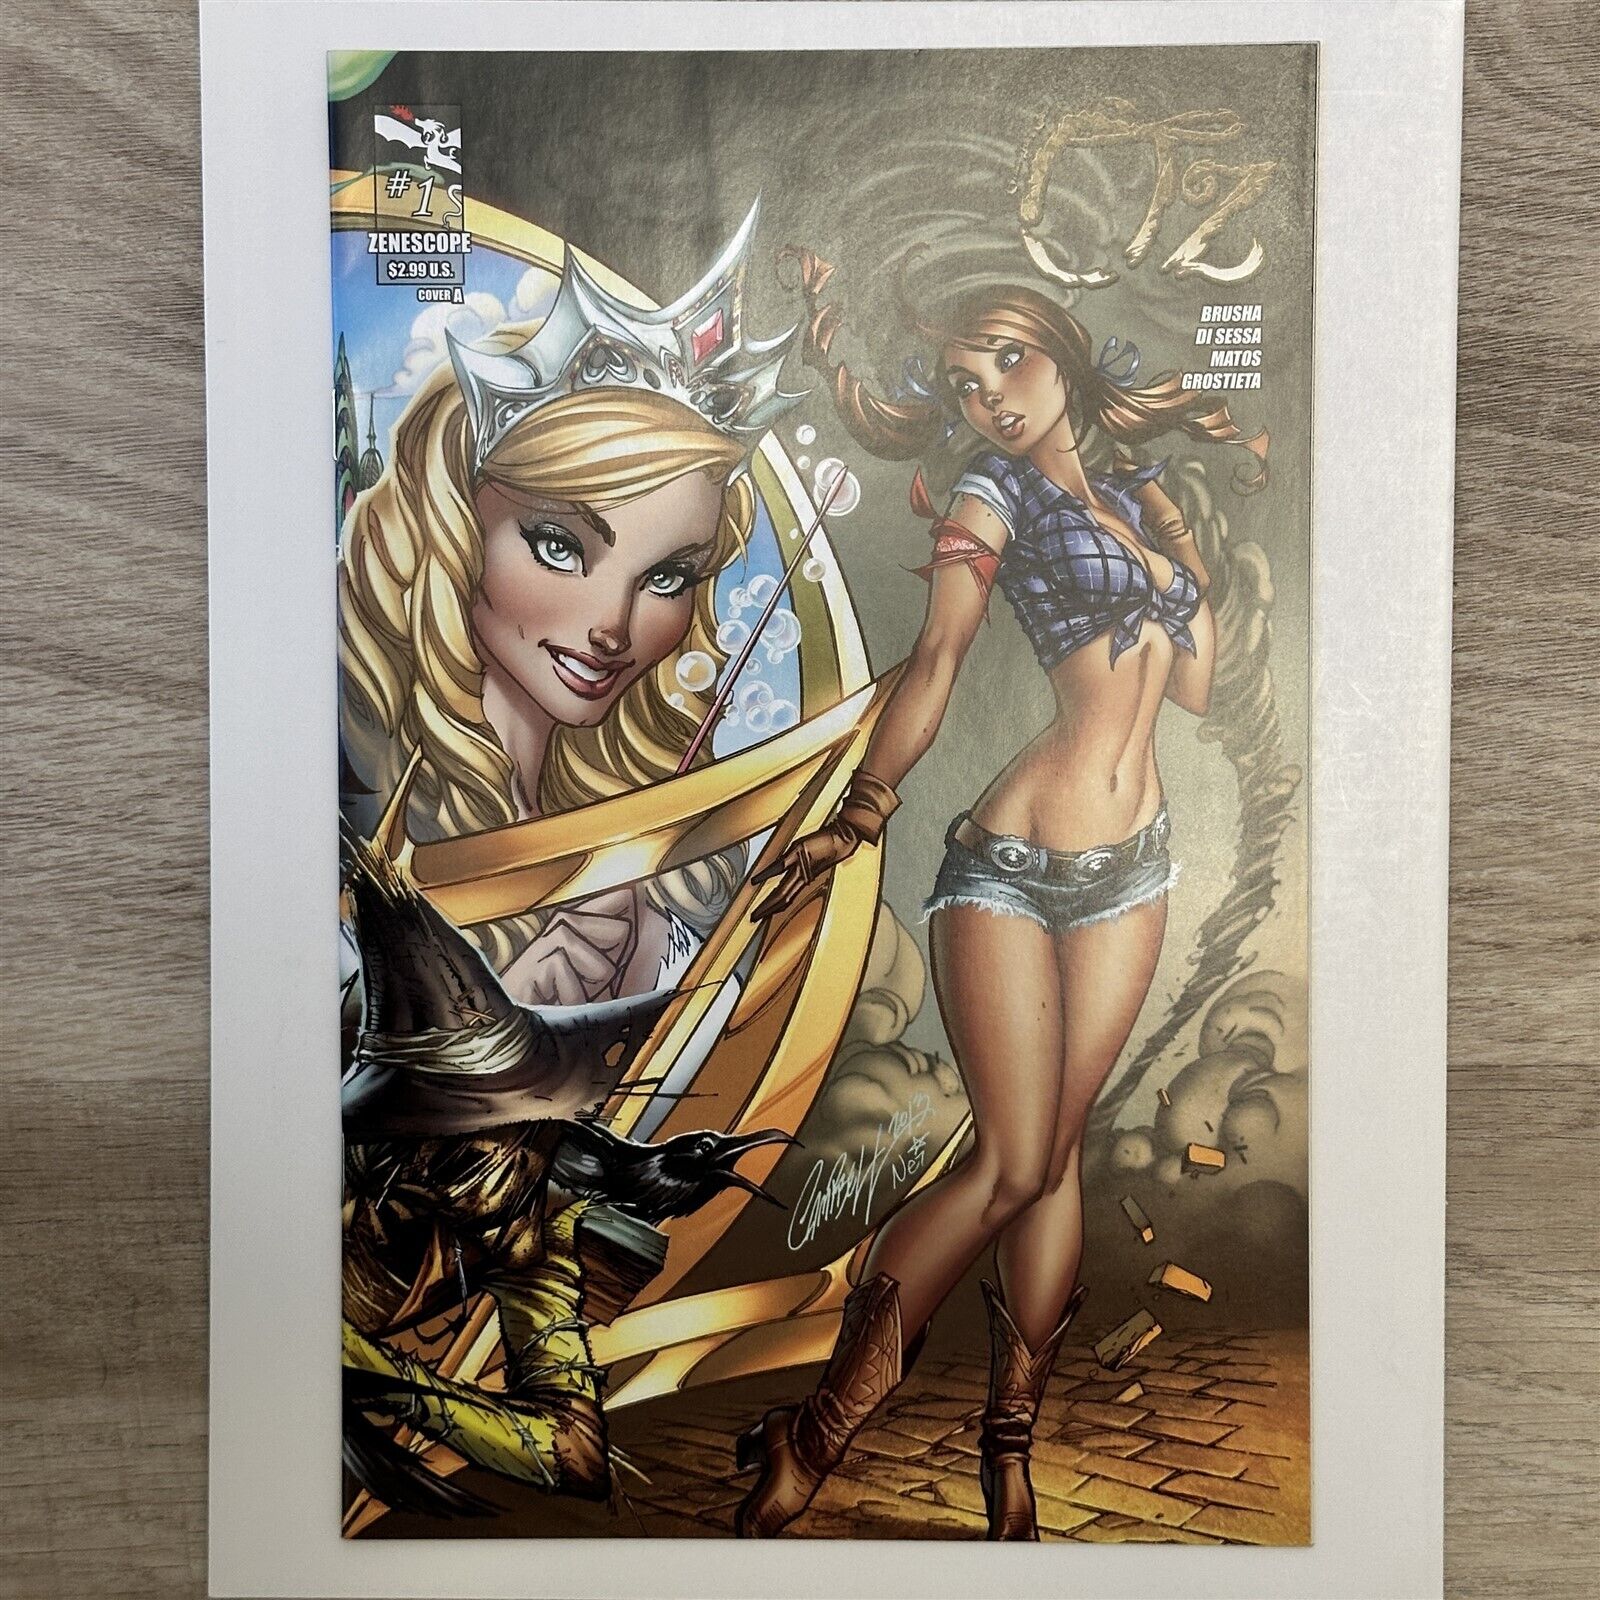 GRIMM FAIRY TALES OZ #1 J SCOTT CAMPBELL WRAPAROUND COVER A DOROTHY GALE HOT GGA